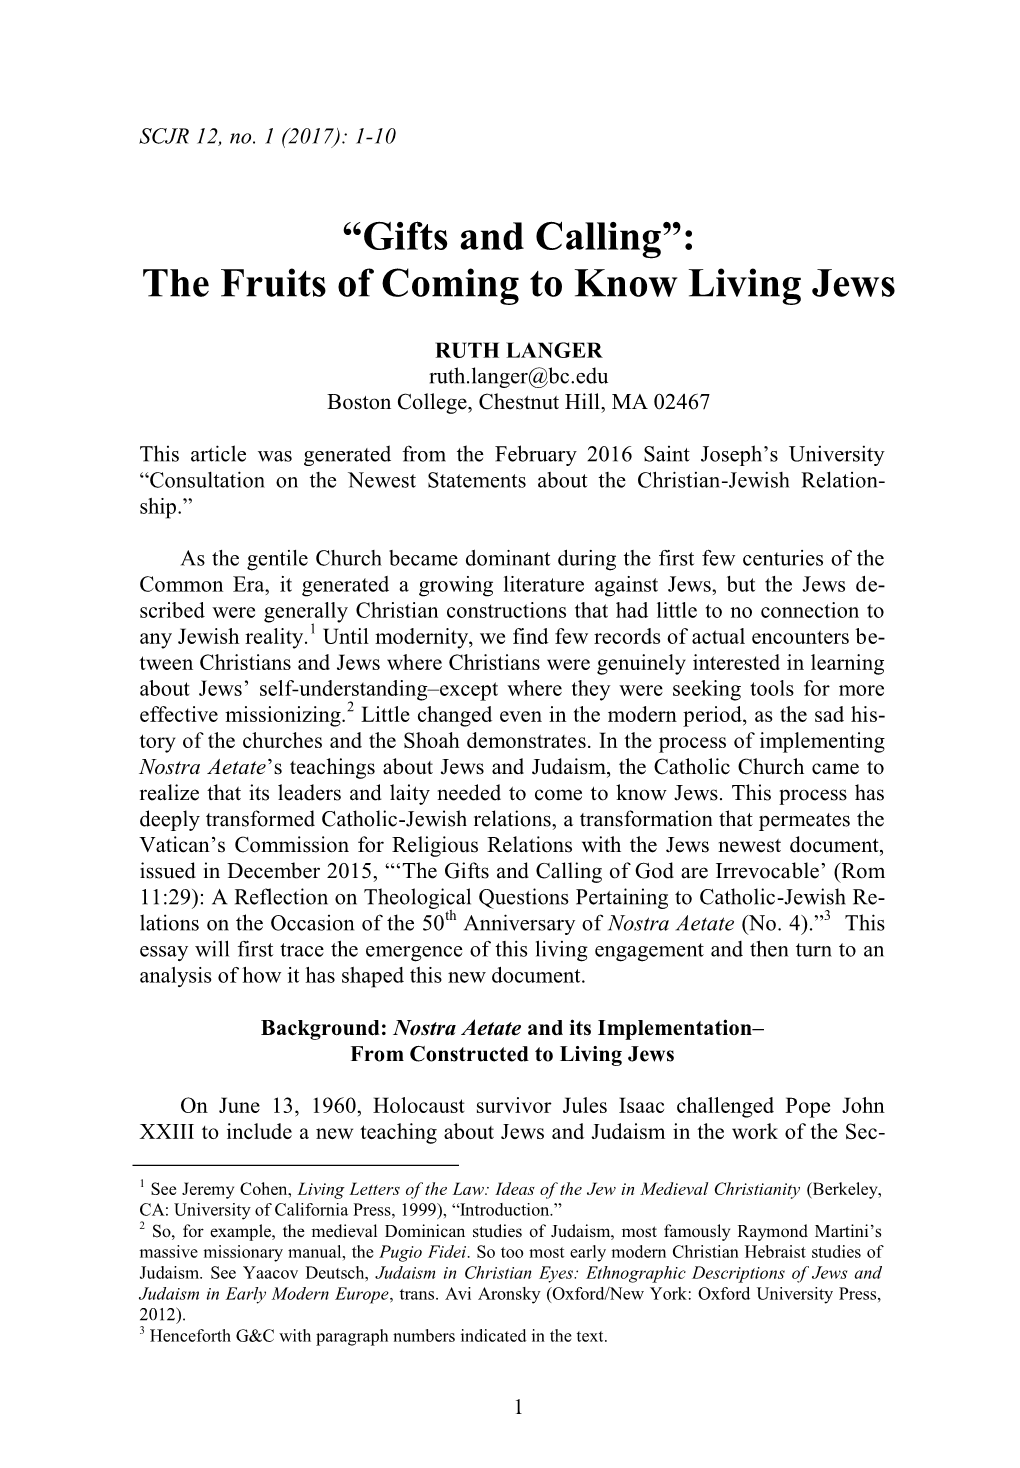 The Fruits of Coming to Know Living Jews